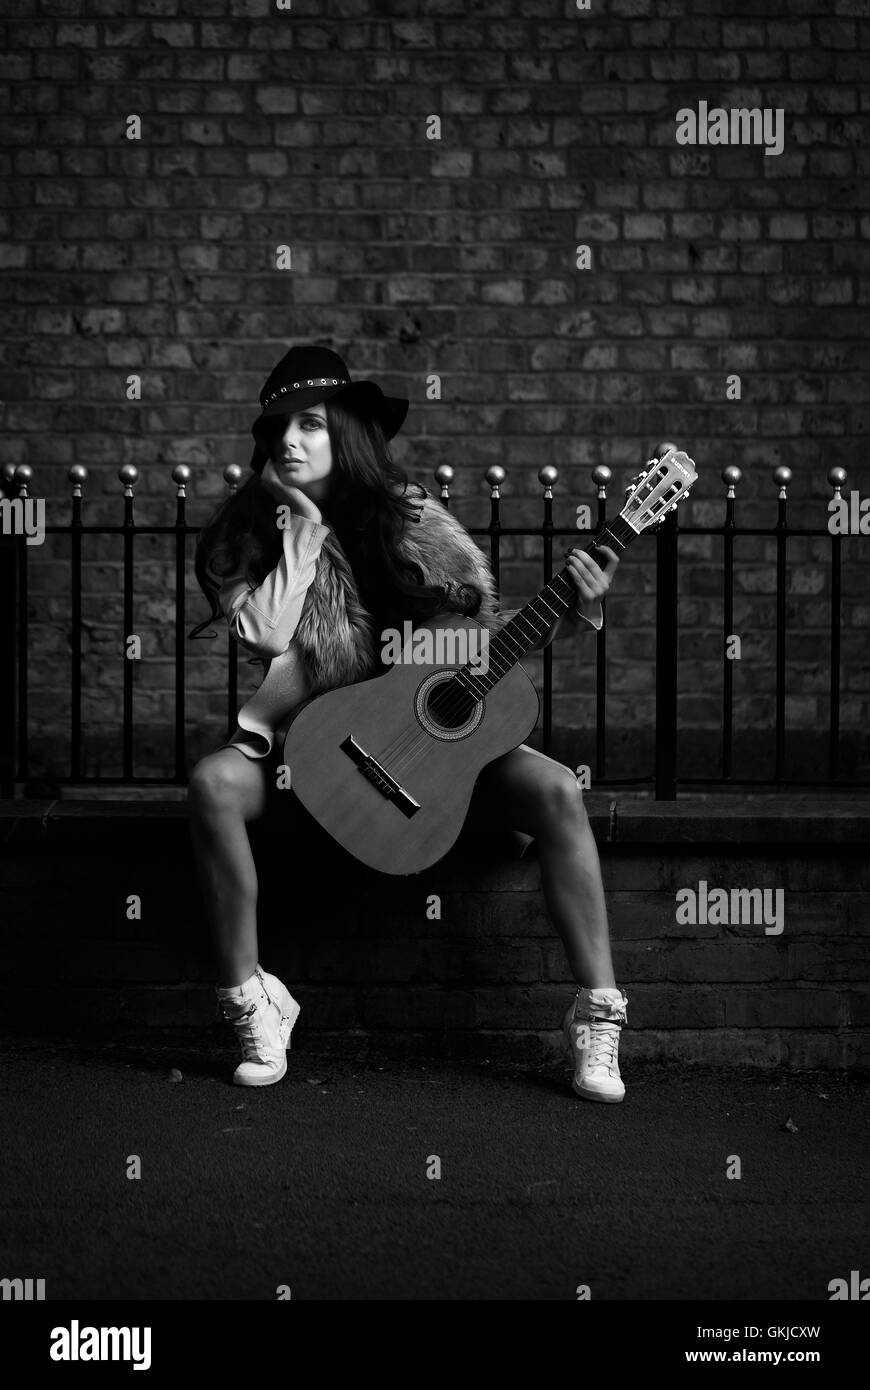 Country music star performer female, sitting on brick wall with brick backdrop Stock Photo